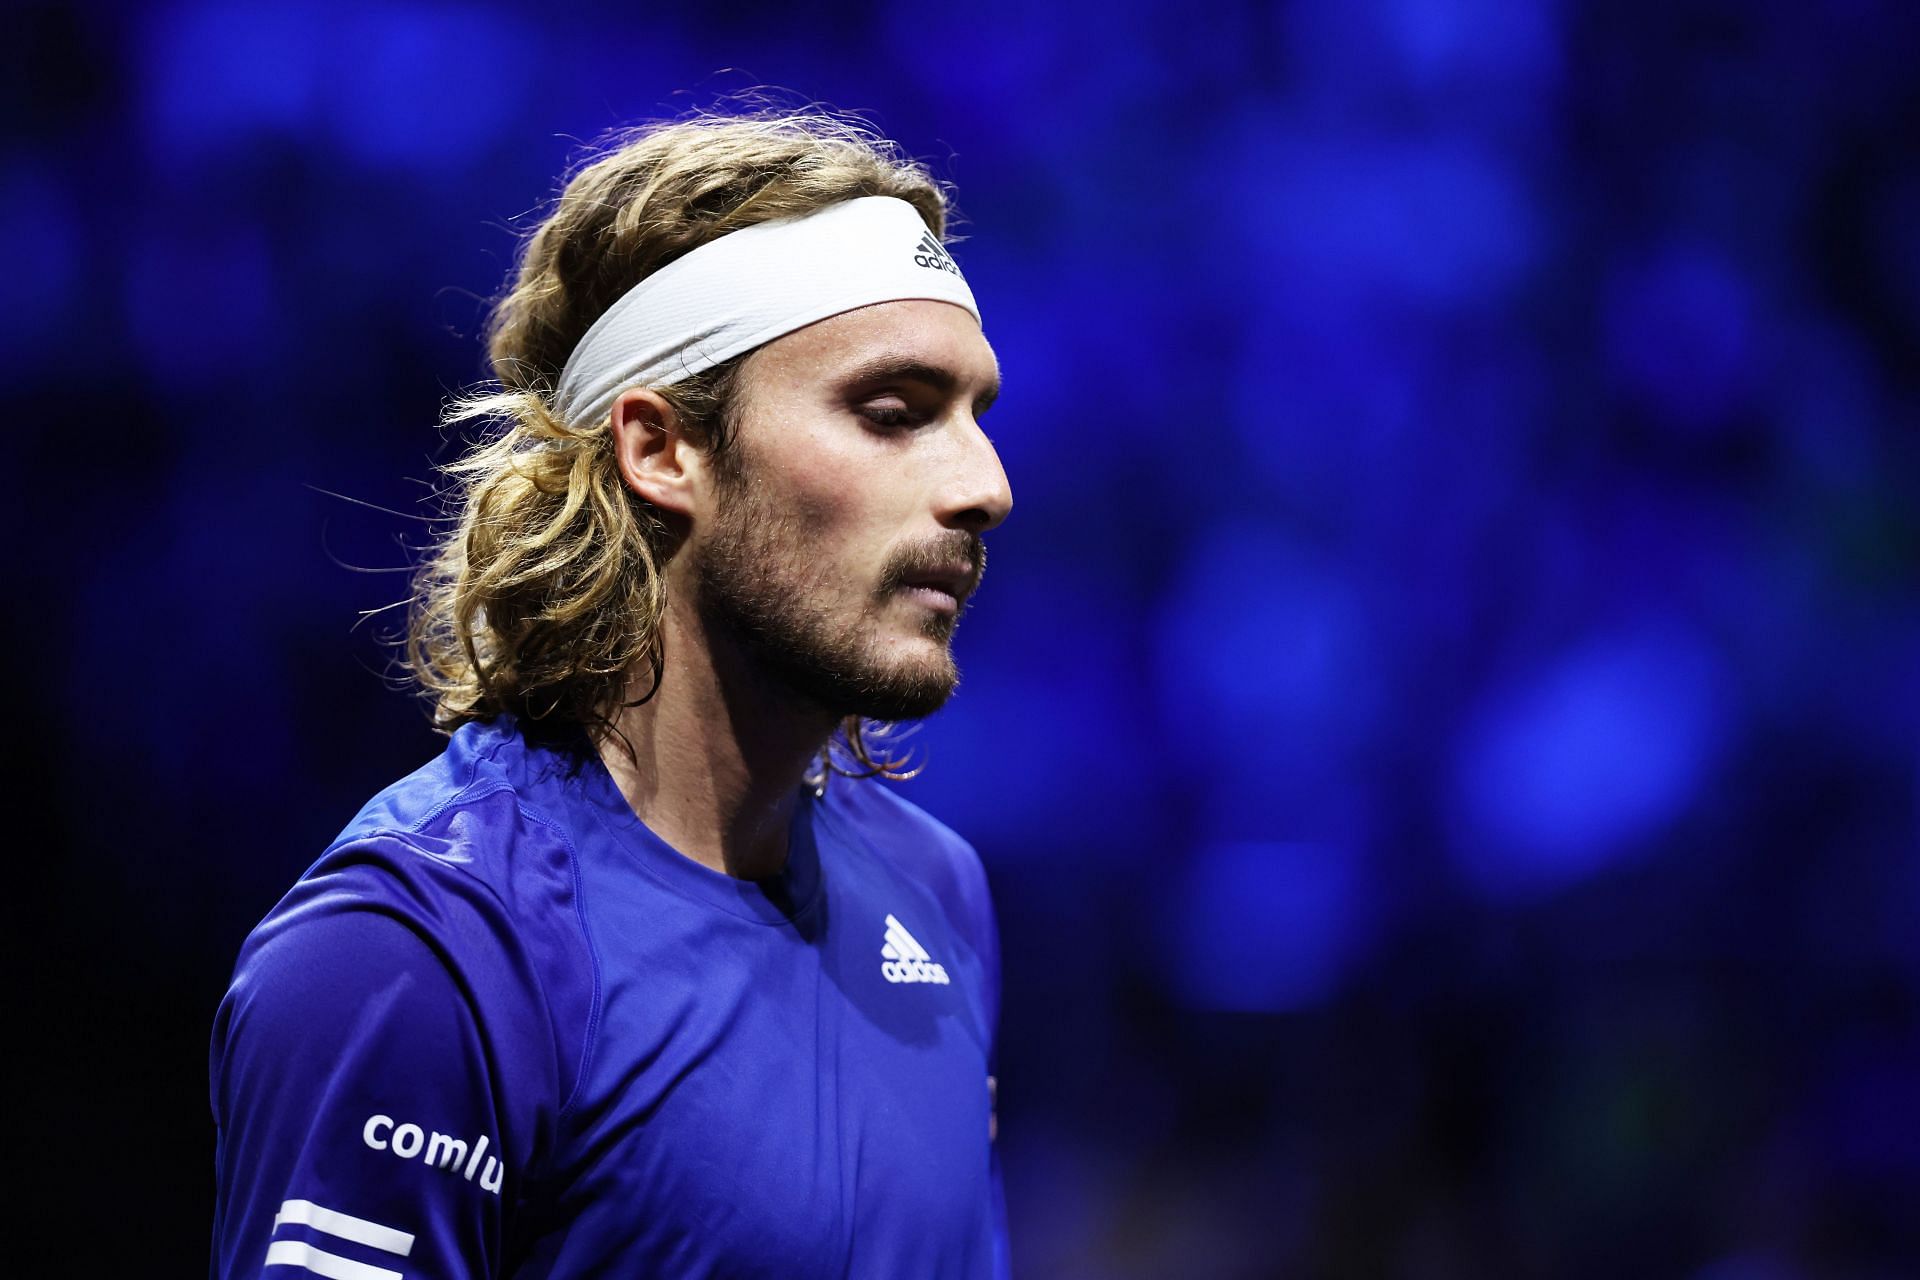 Stefanos Tsitsipas is the second seed in Vienna